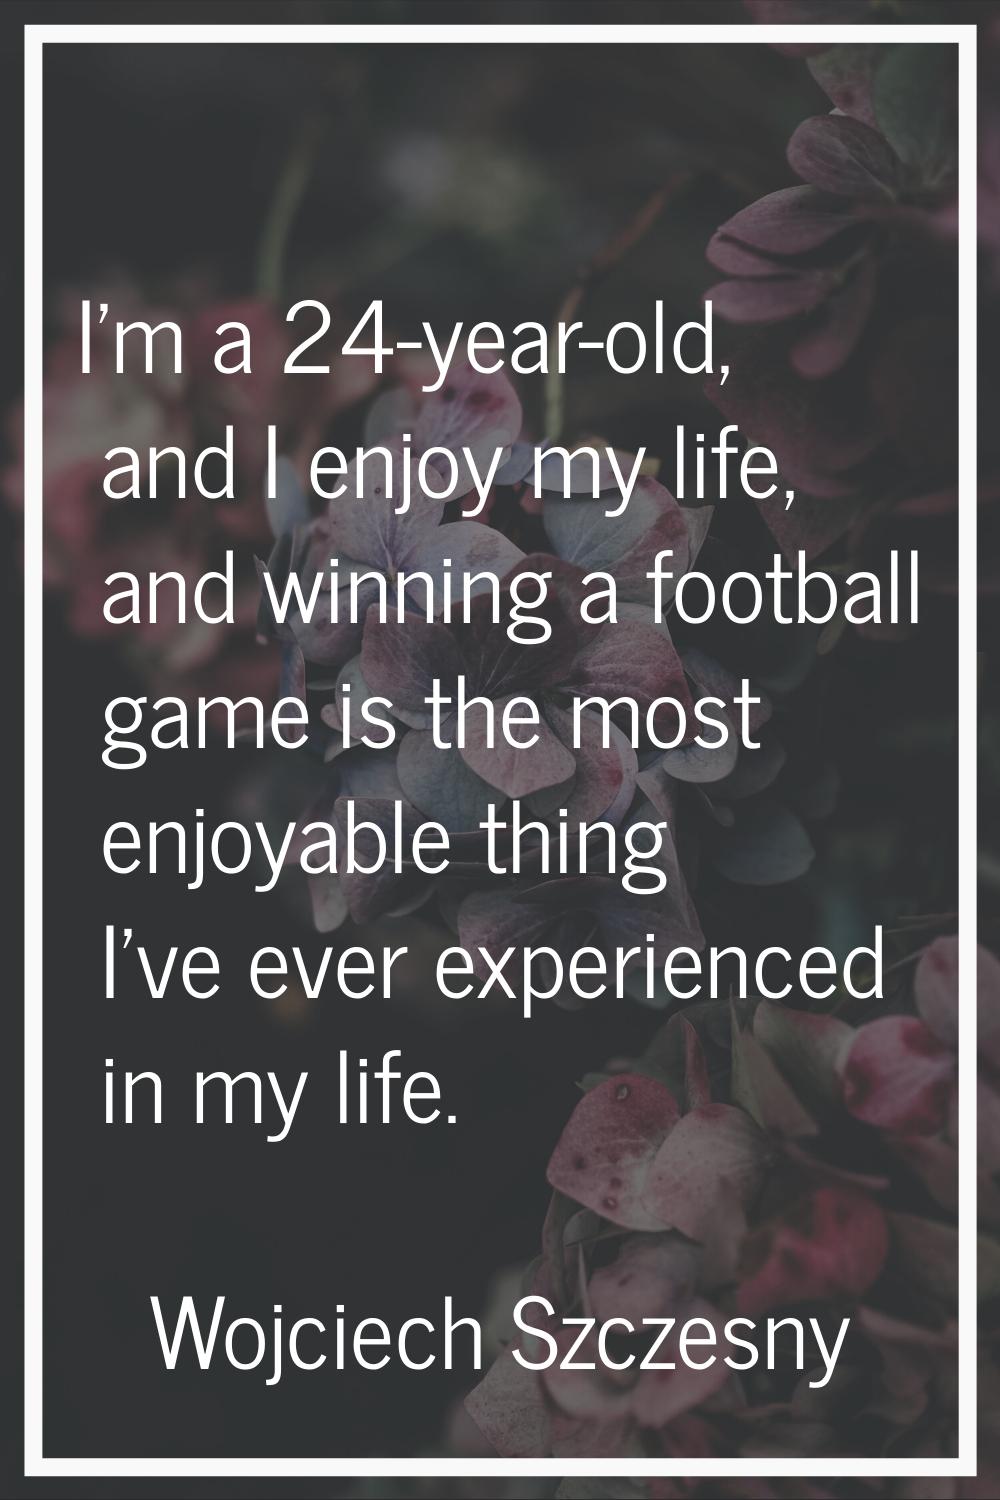 I'm a 24-year-old, and I enjoy my life, and winning a football game is the most enjoyable thing I'v